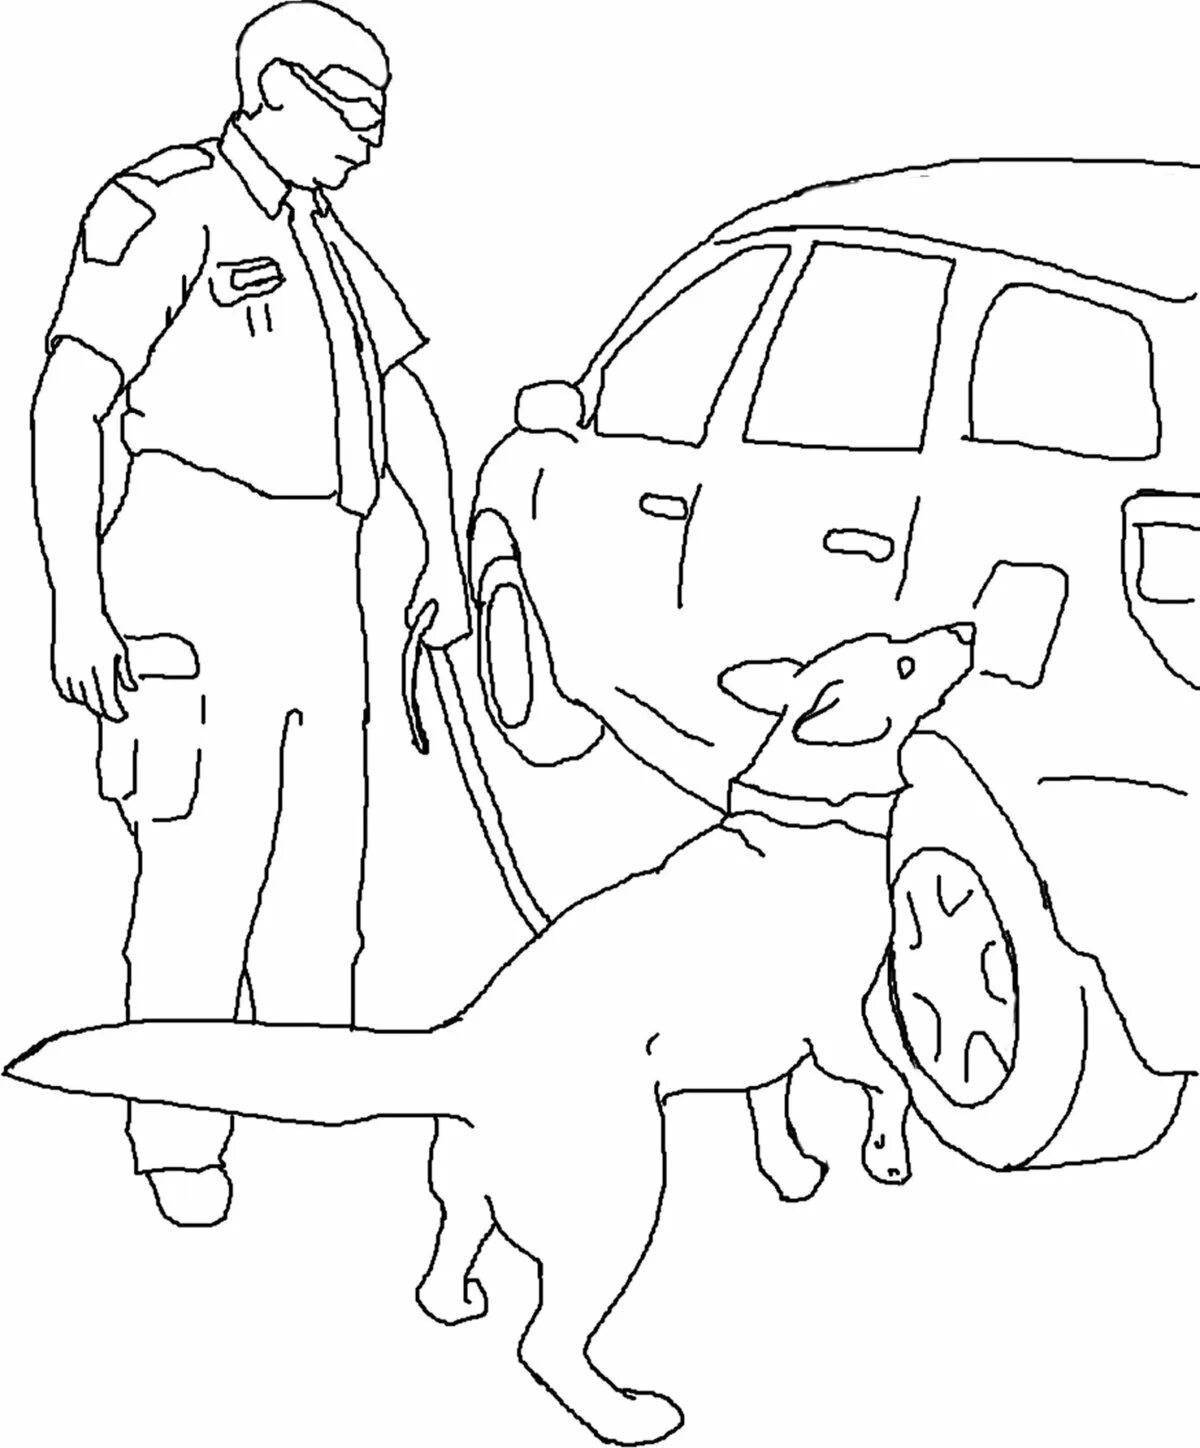 Great service dogs coloring book for kids